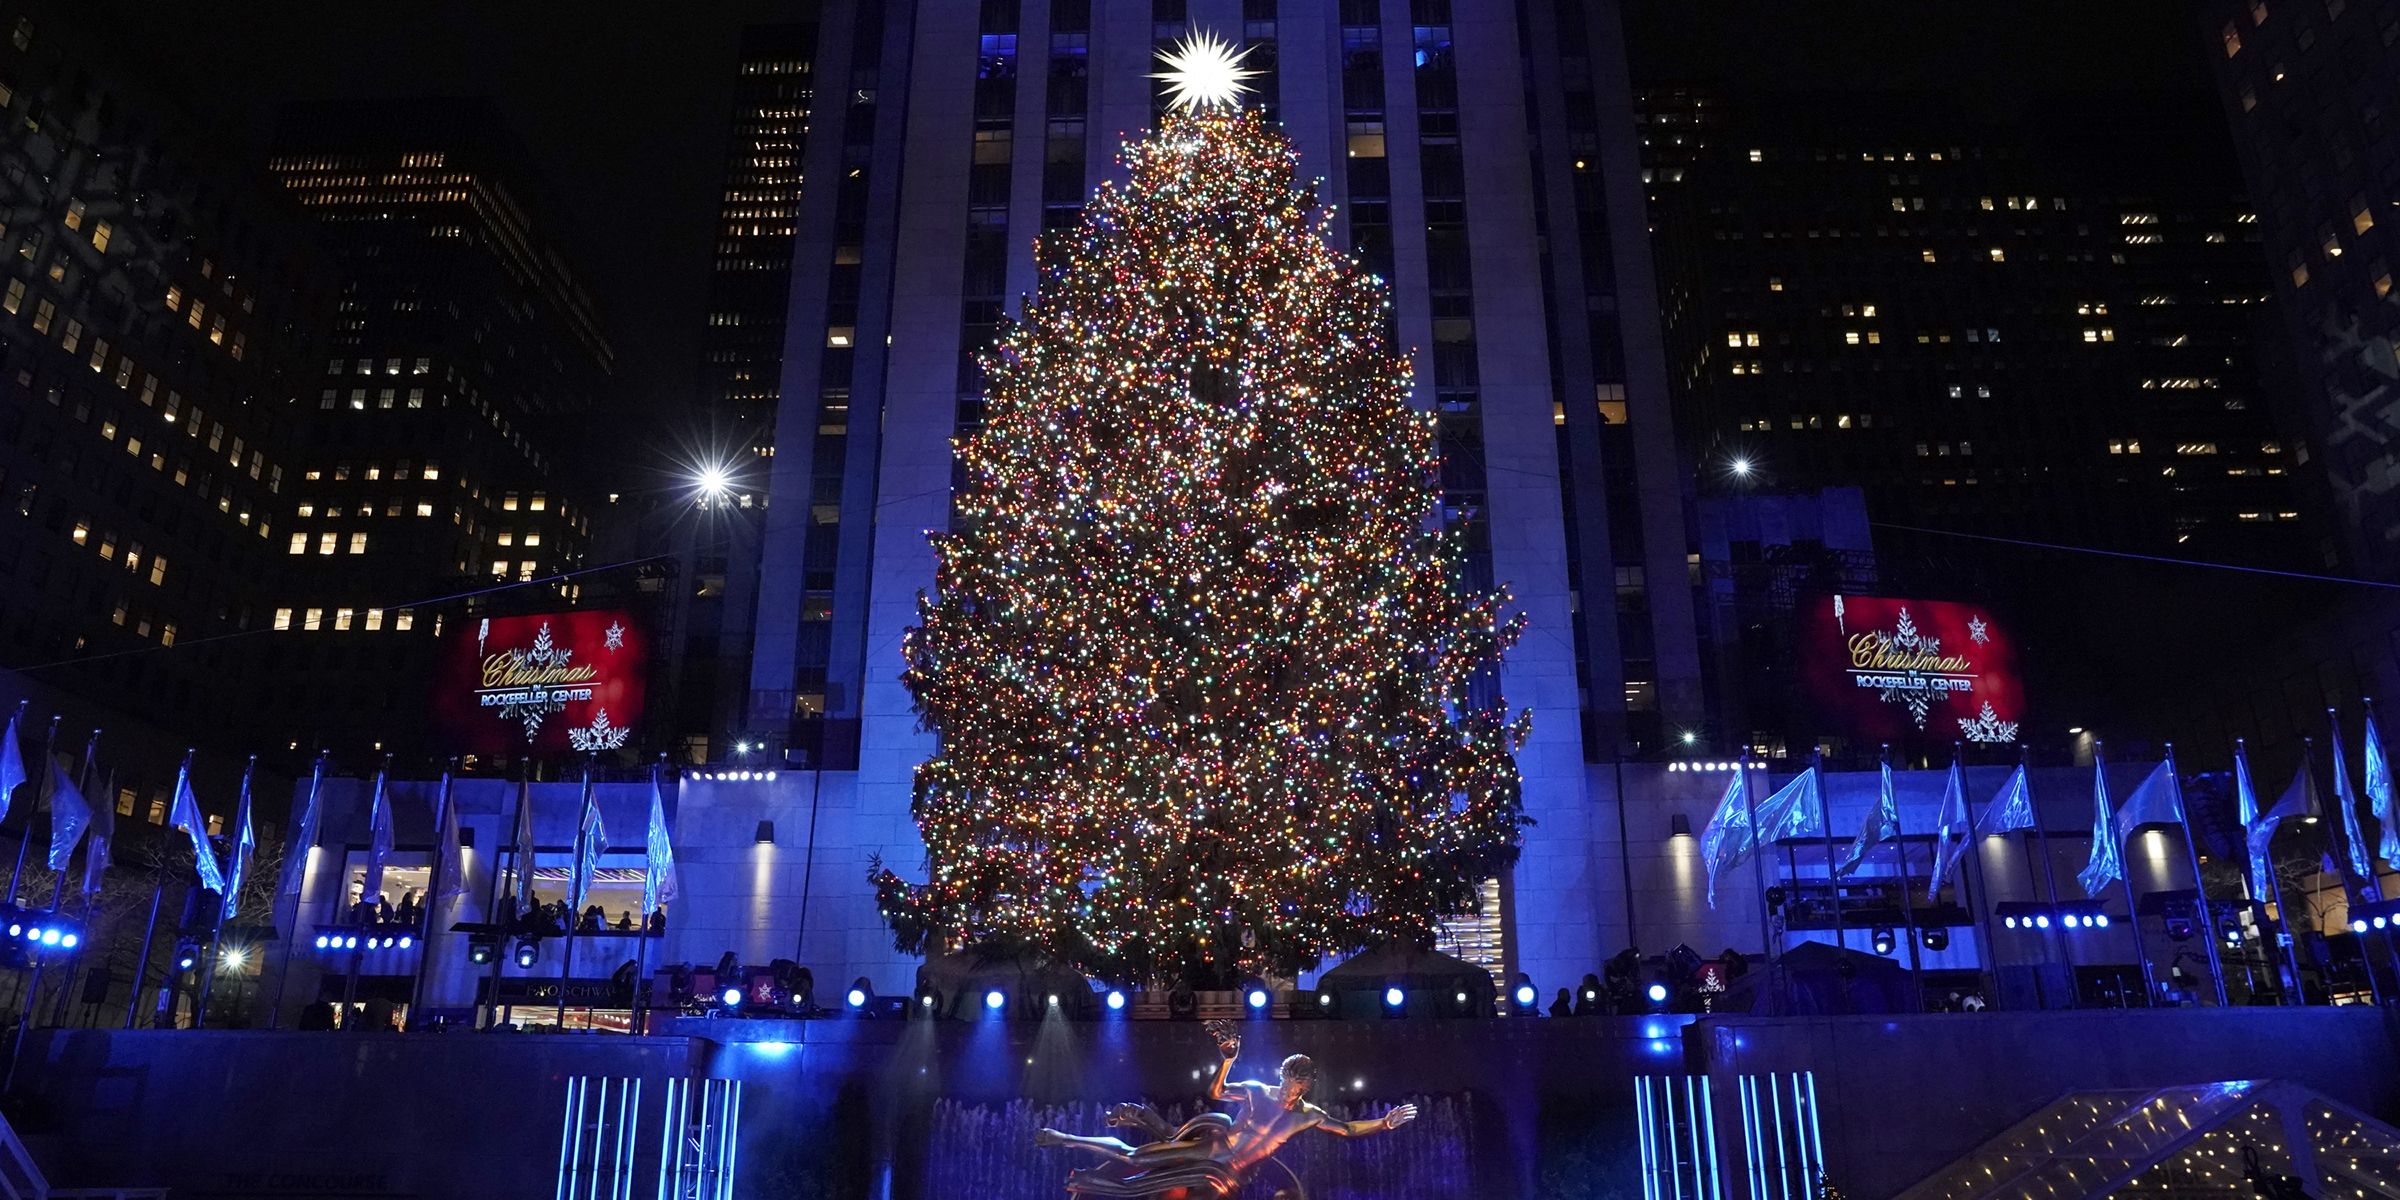 The 2019 Rockefeller Center Christmas tree has been chosen! Here's the 1st look